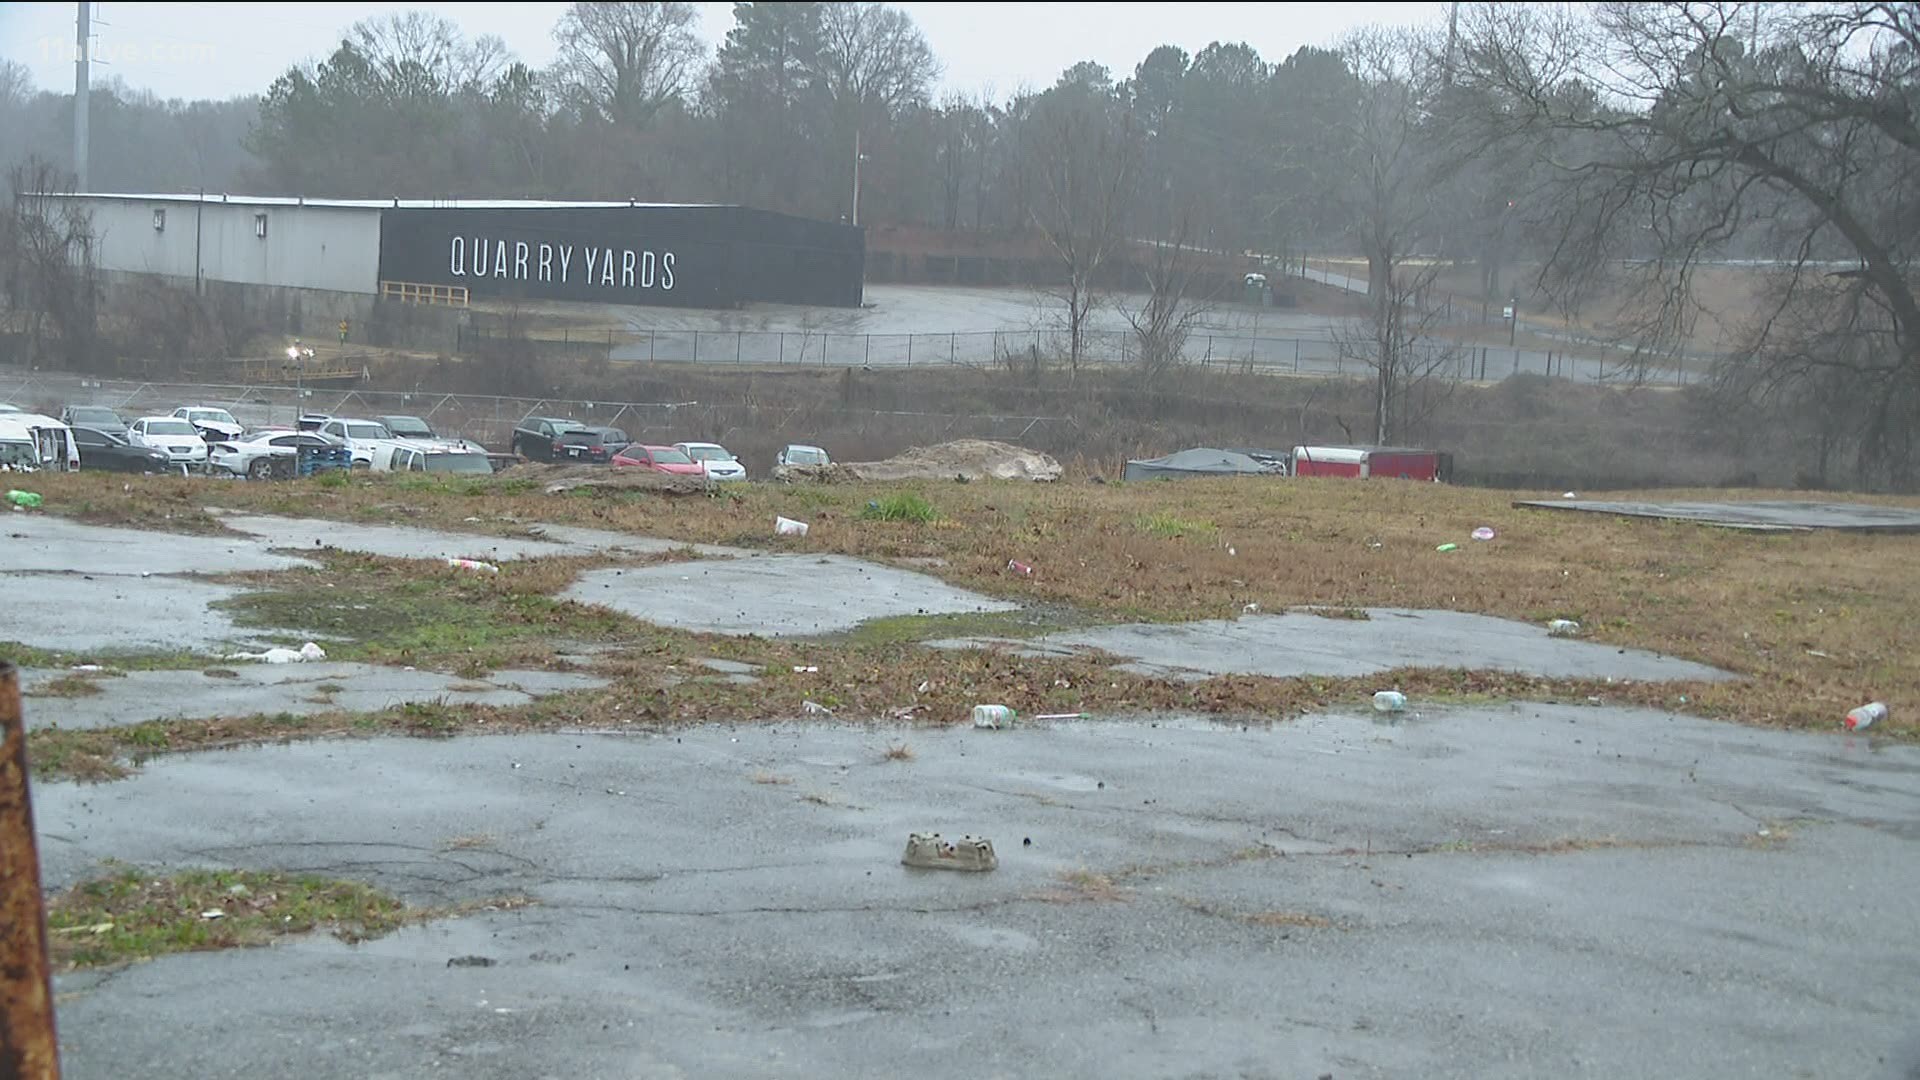 Tech giant says it will seek community input for newly announced project in Atlanta's Bankhead area.